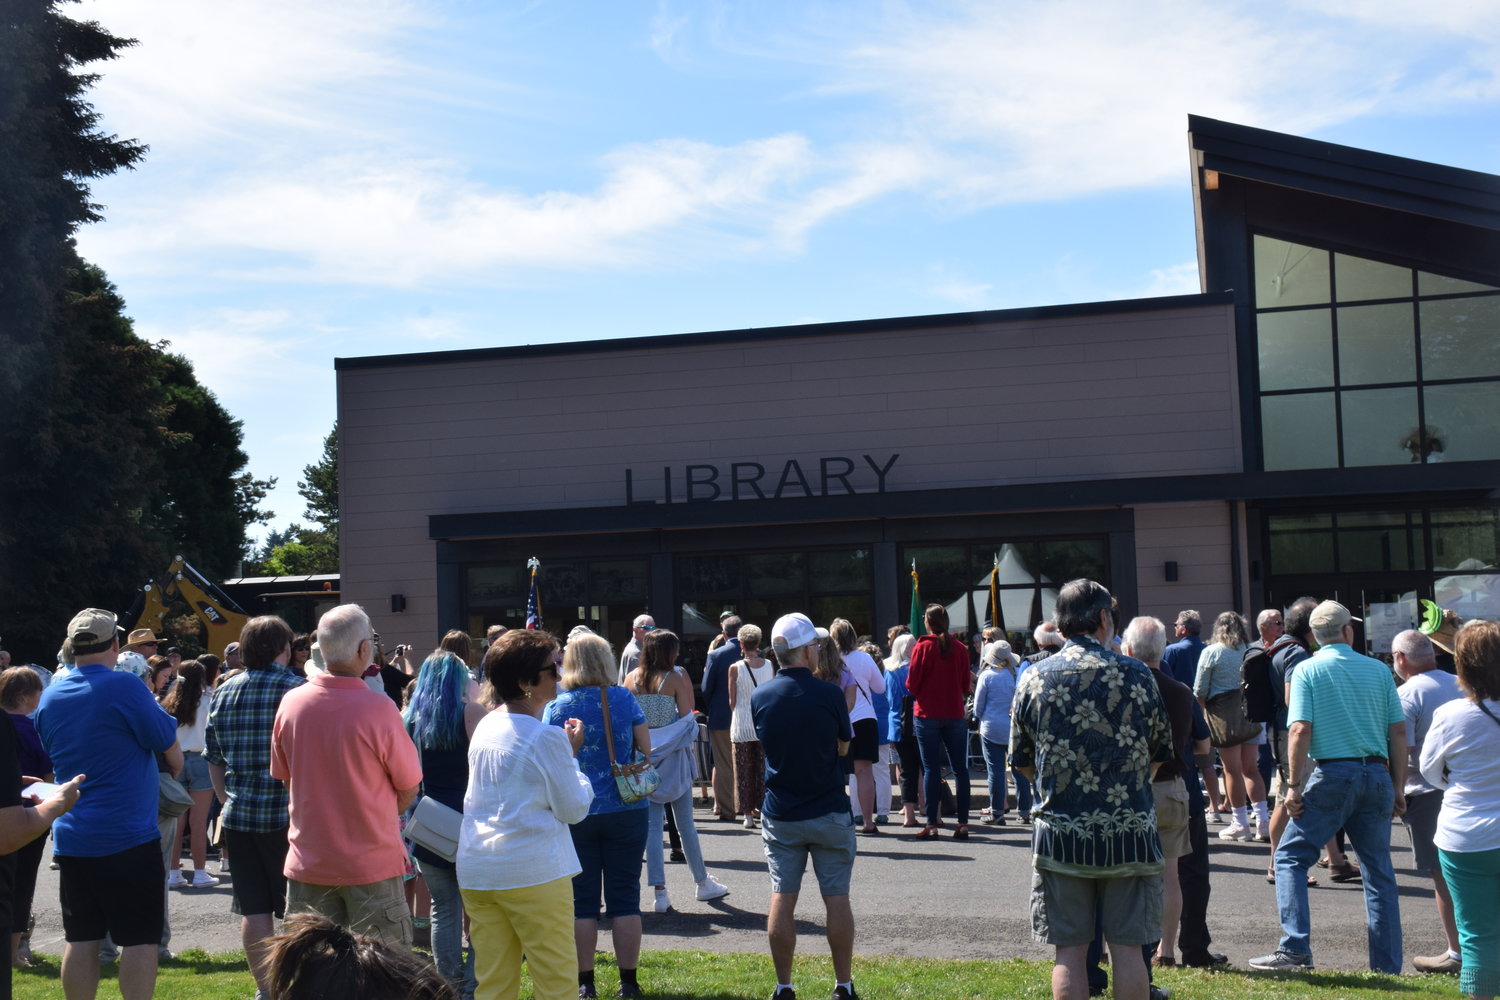 A crowd gathers to hear speakers before a ceremonial ribbon cutting during the grand opening of the Ridgefield Community Library on July 9.